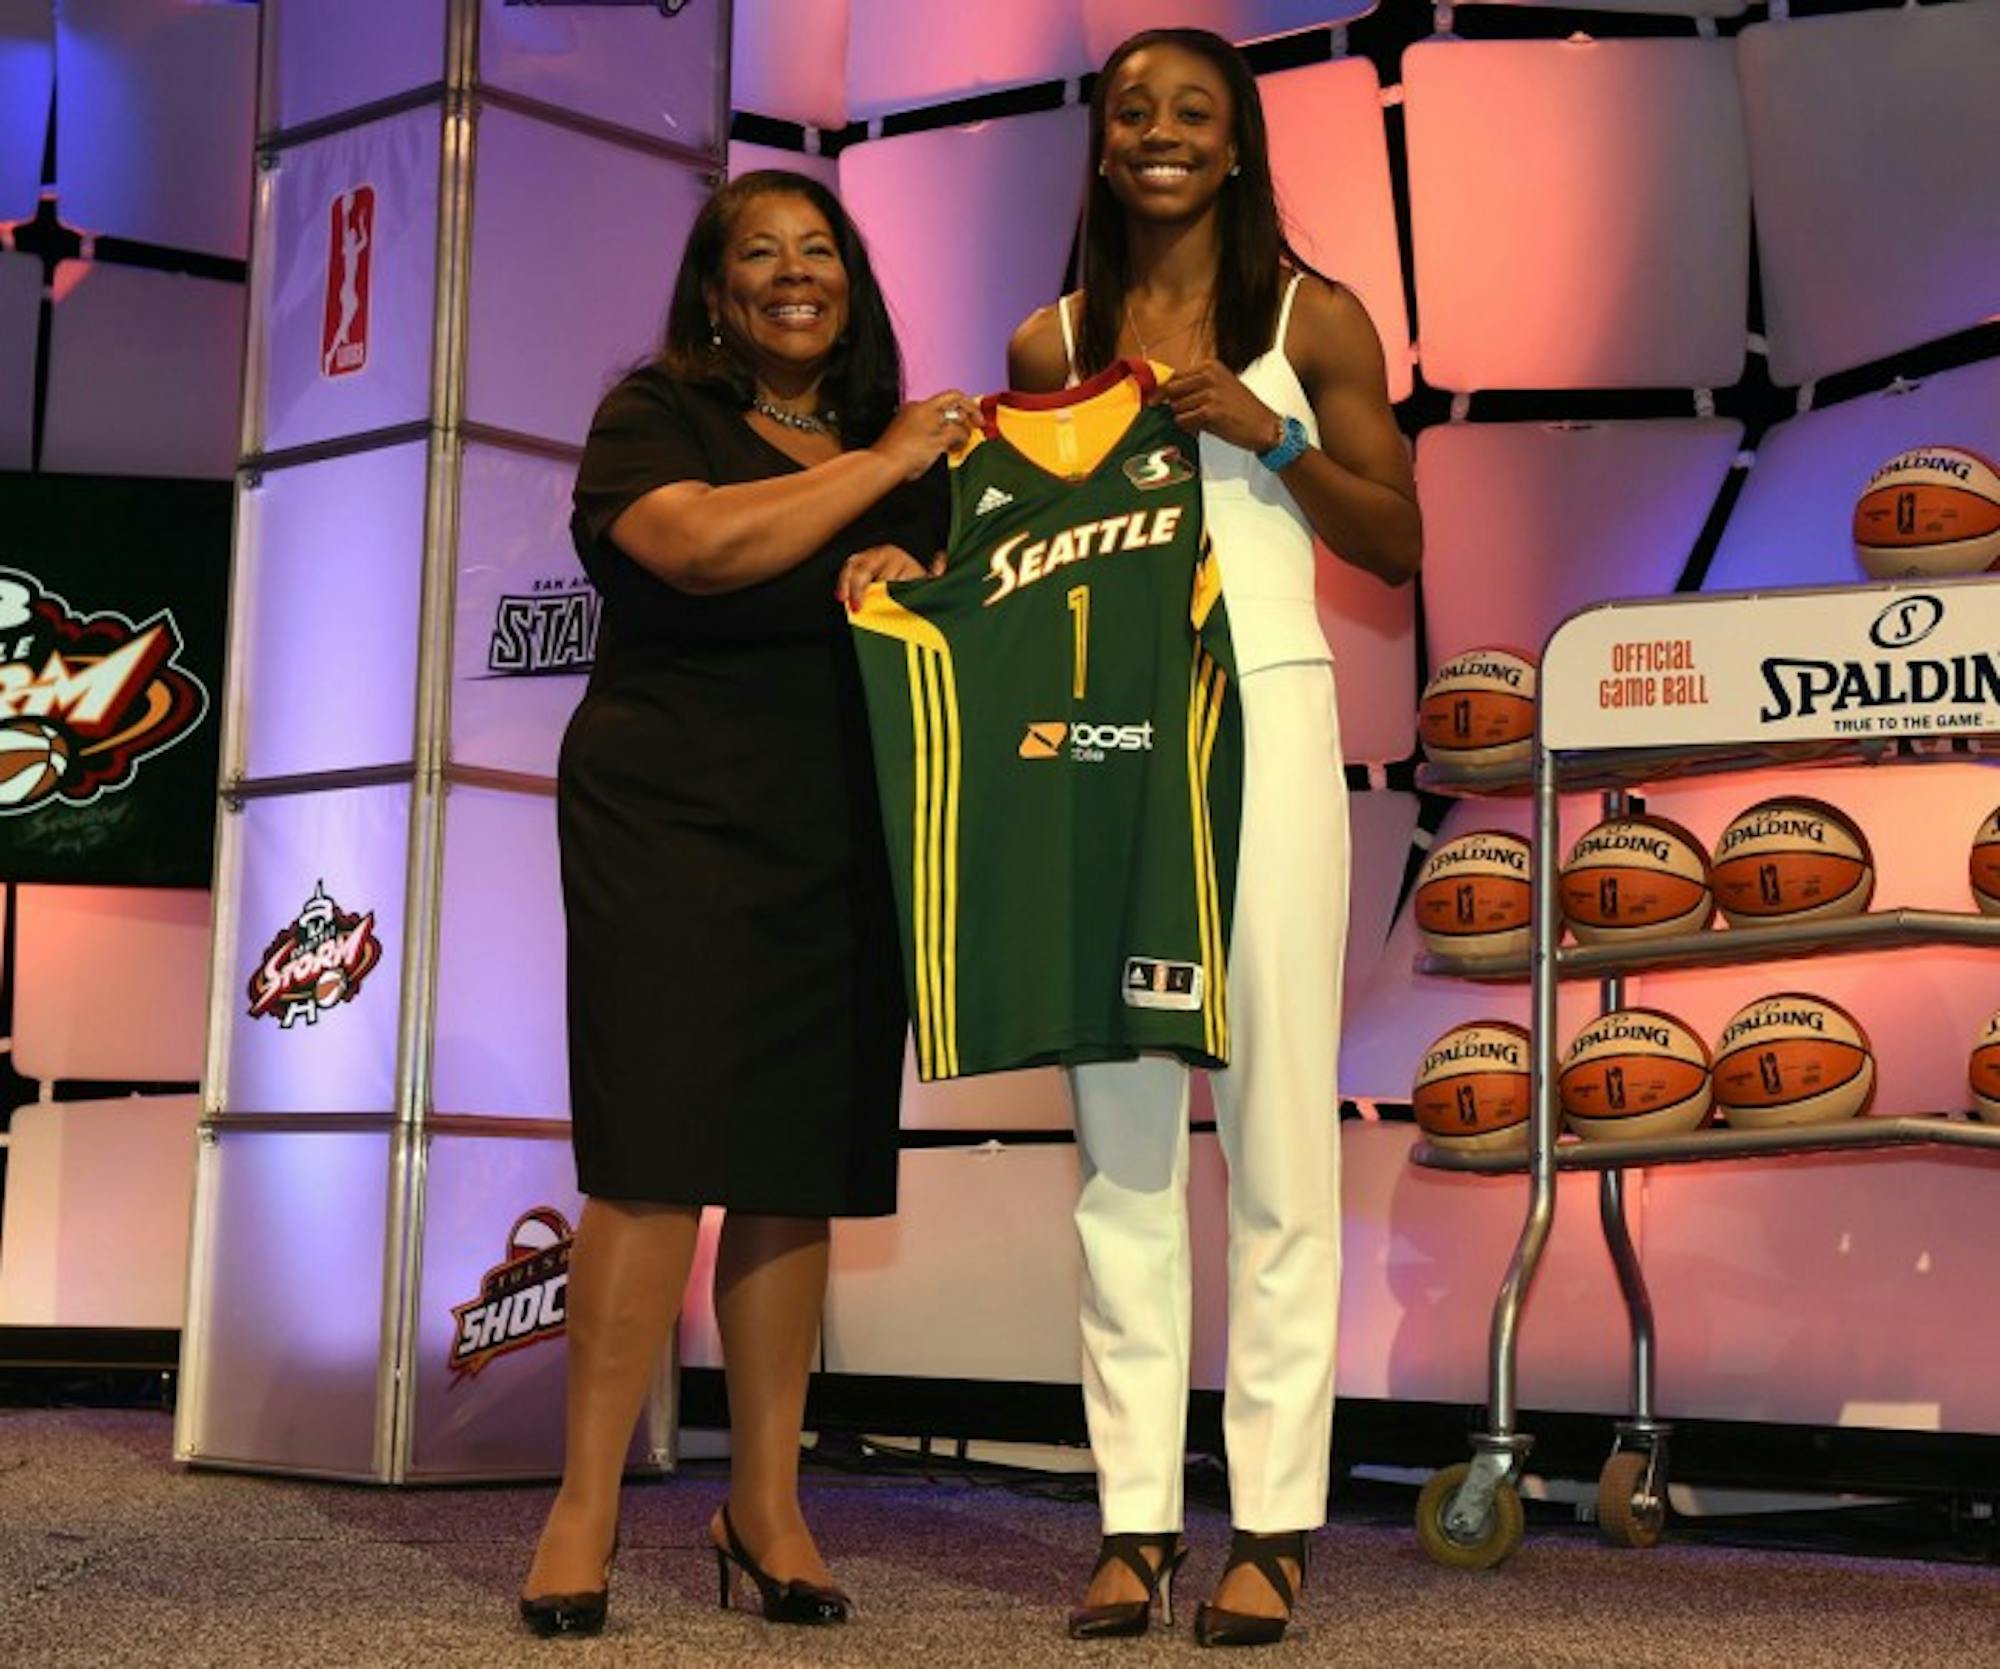 WNBA President Laurel Richie poses with Jewel Loyd after she was selected number one overall by the Seattle Storm during the 2015 WNBA Draft Presented By State Farm on April 16, 2015 at Mohegan Sun Arena in Uncasville, Connecticut.  NOTE TO USER: User expressly acknowledges and agrees that, by downloading and/or using this Photograph, user is consenting to the terms and conditions of the Getty Images License Agreement. Mandatory Copyright Notice: Copyright 2015 NBAE  (Photo by Brian Babineau/NBAE via Getty Images)